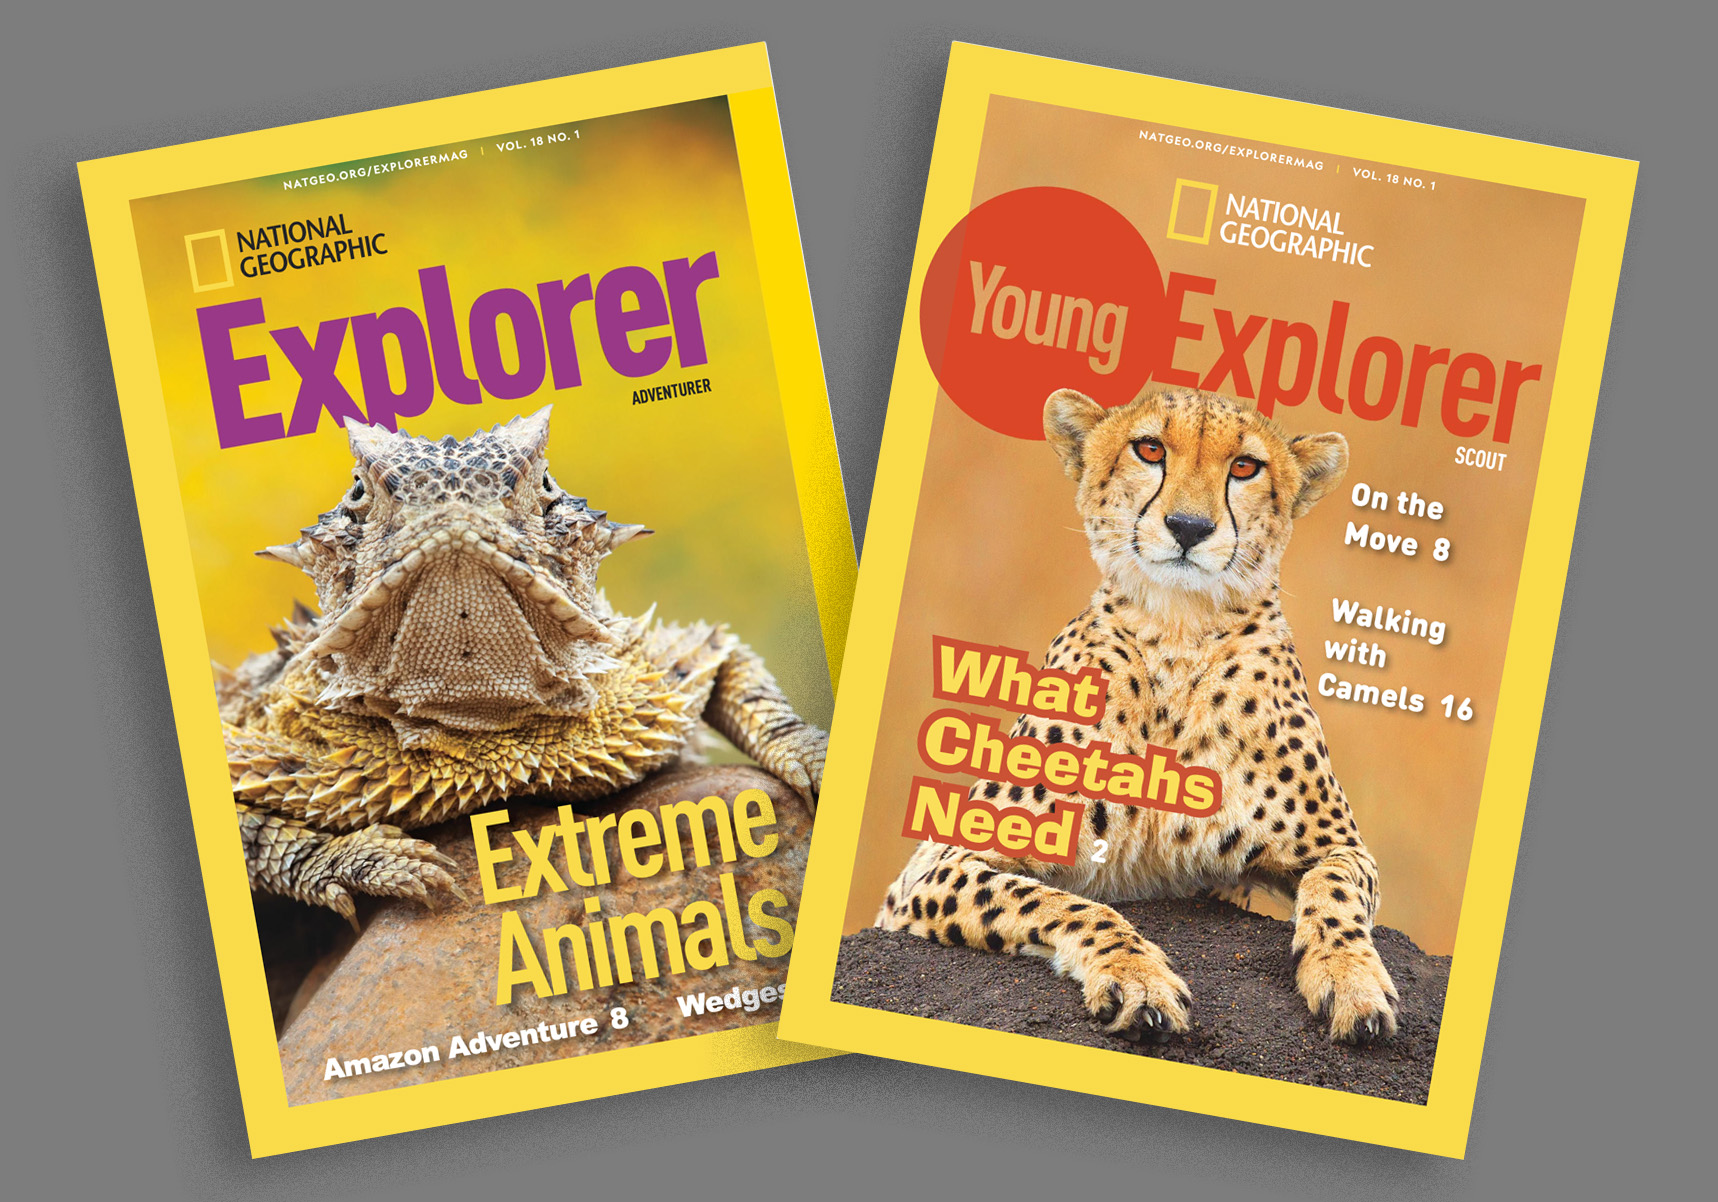 National Geographic: a brief history of the world's most famous magazine  for (armchair) explorers